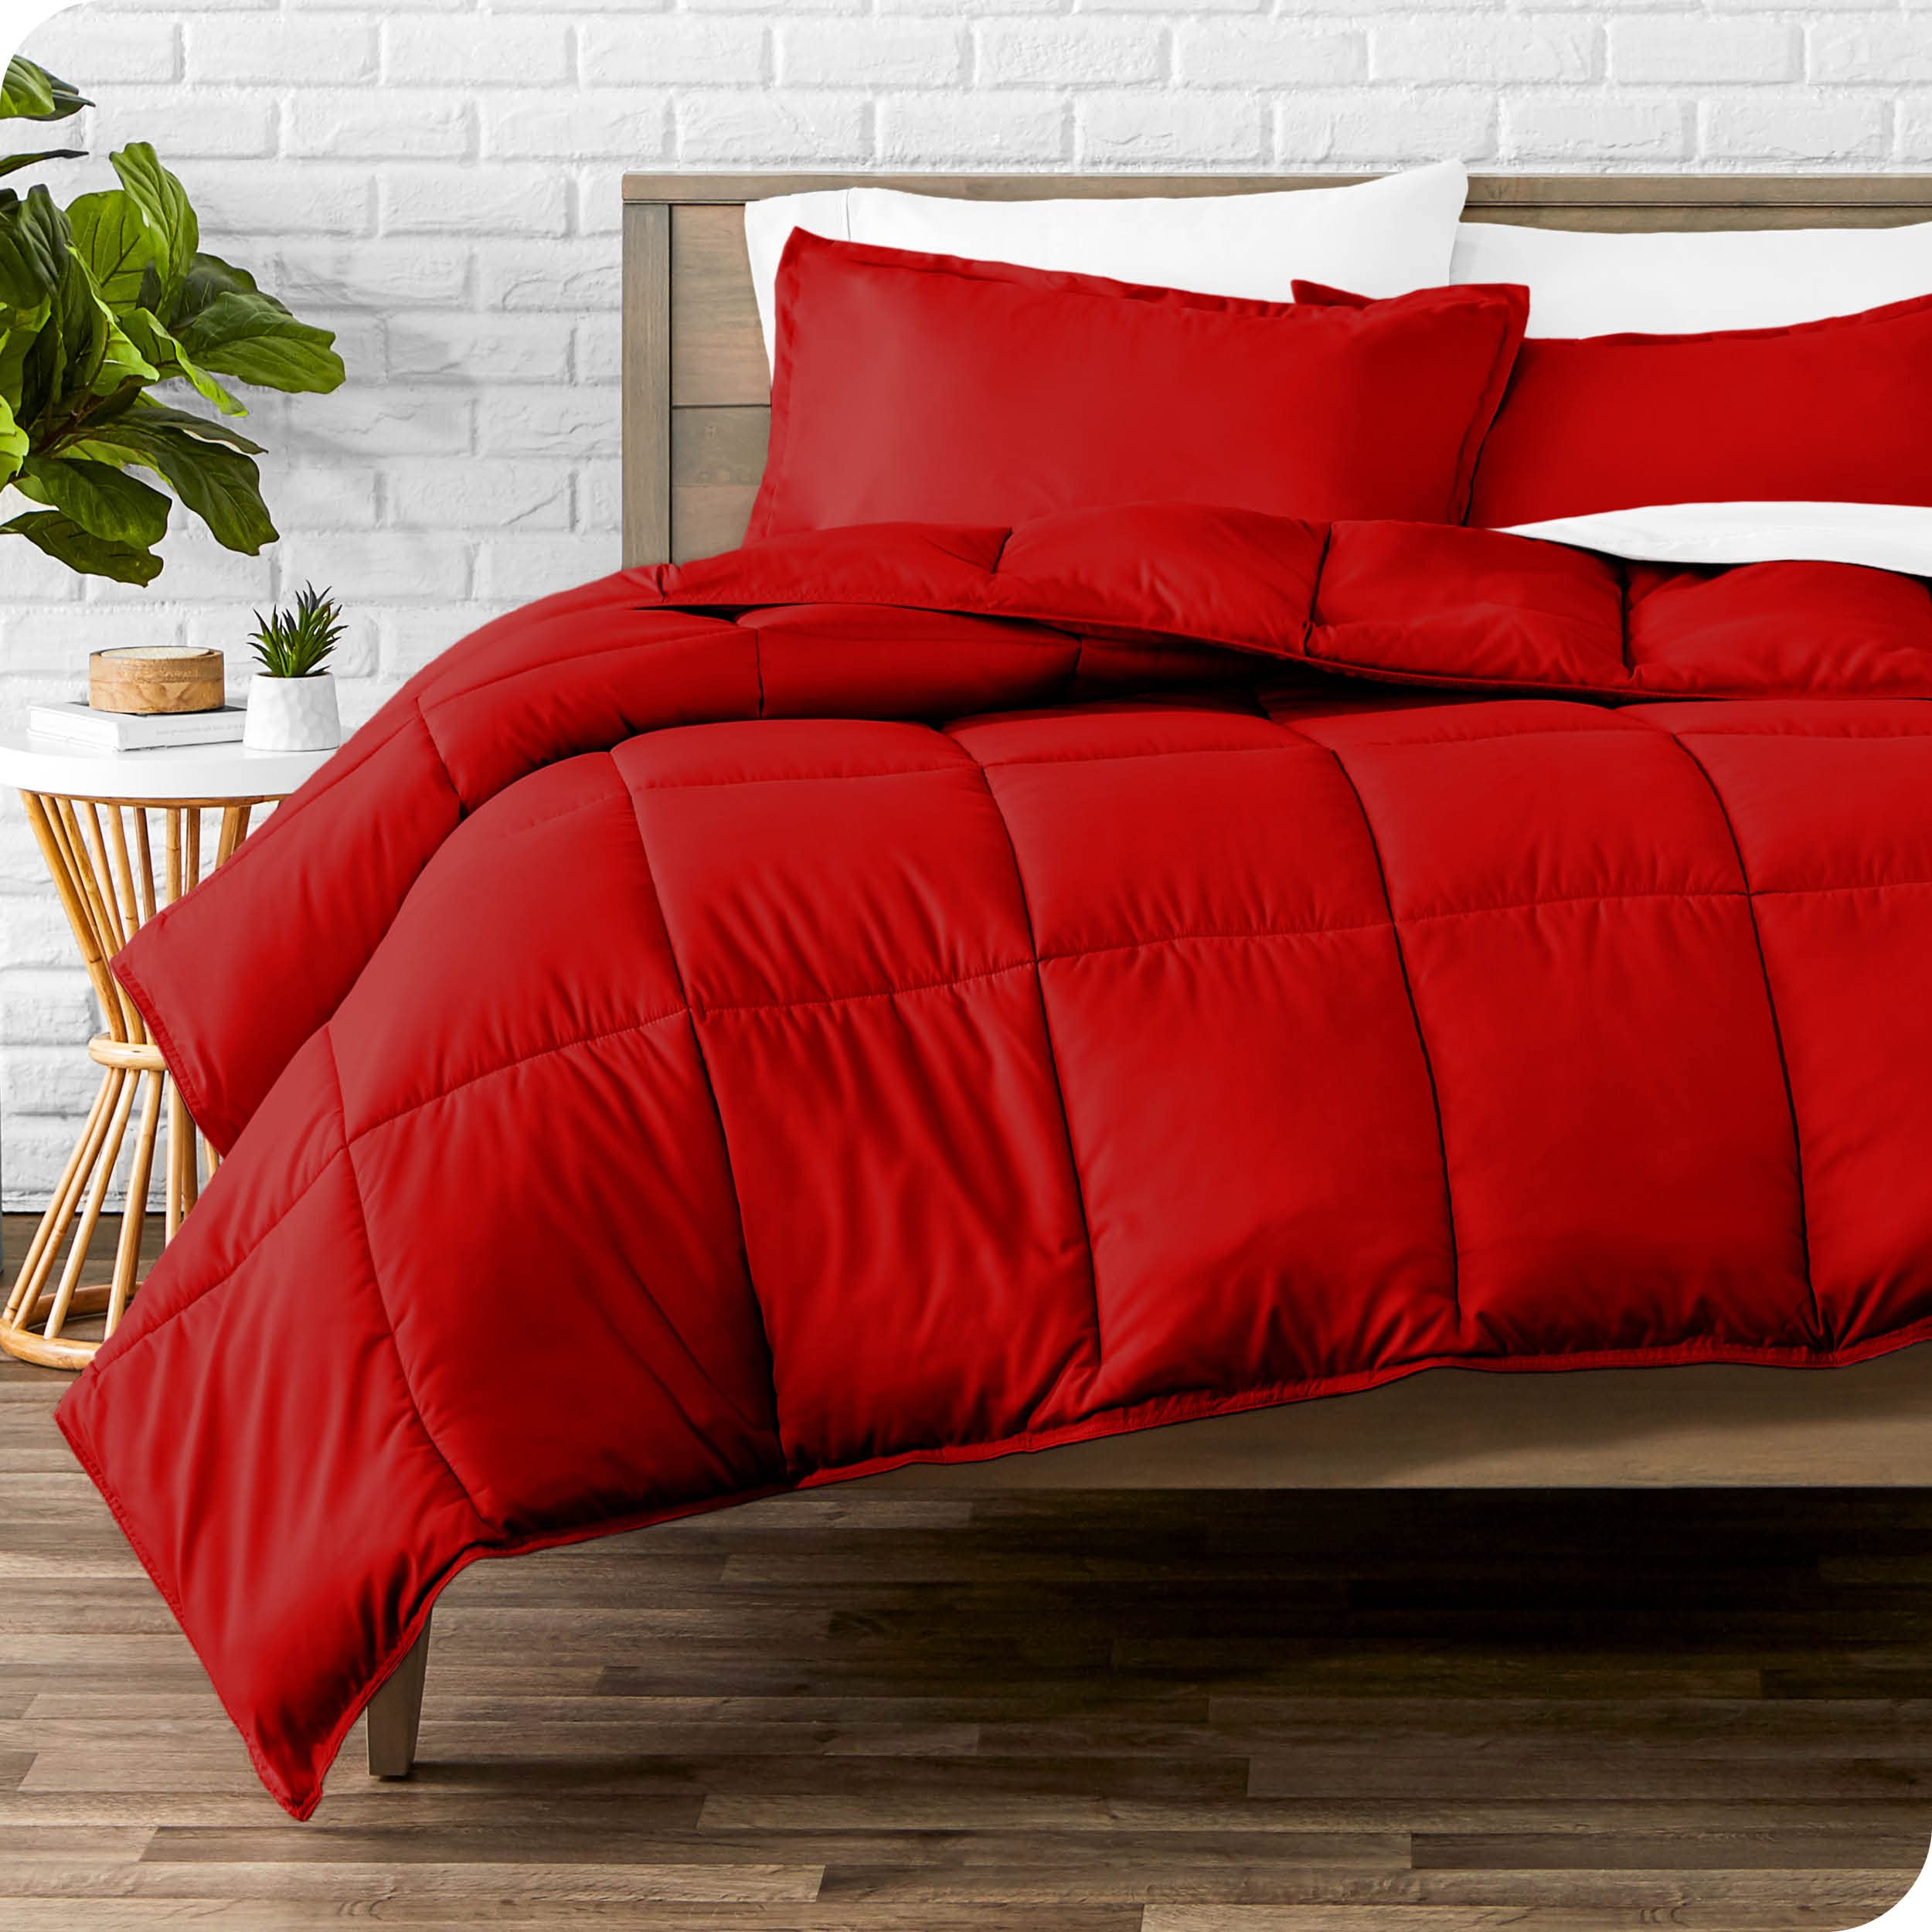 Book Cover Bare Home Comforter Set - King/California King Size - Ultra-Soft - Goose Down Alternative - Premium 1800 Series - All Season Warmth (King/Cal King, Red) King/Cal King 18 - Red